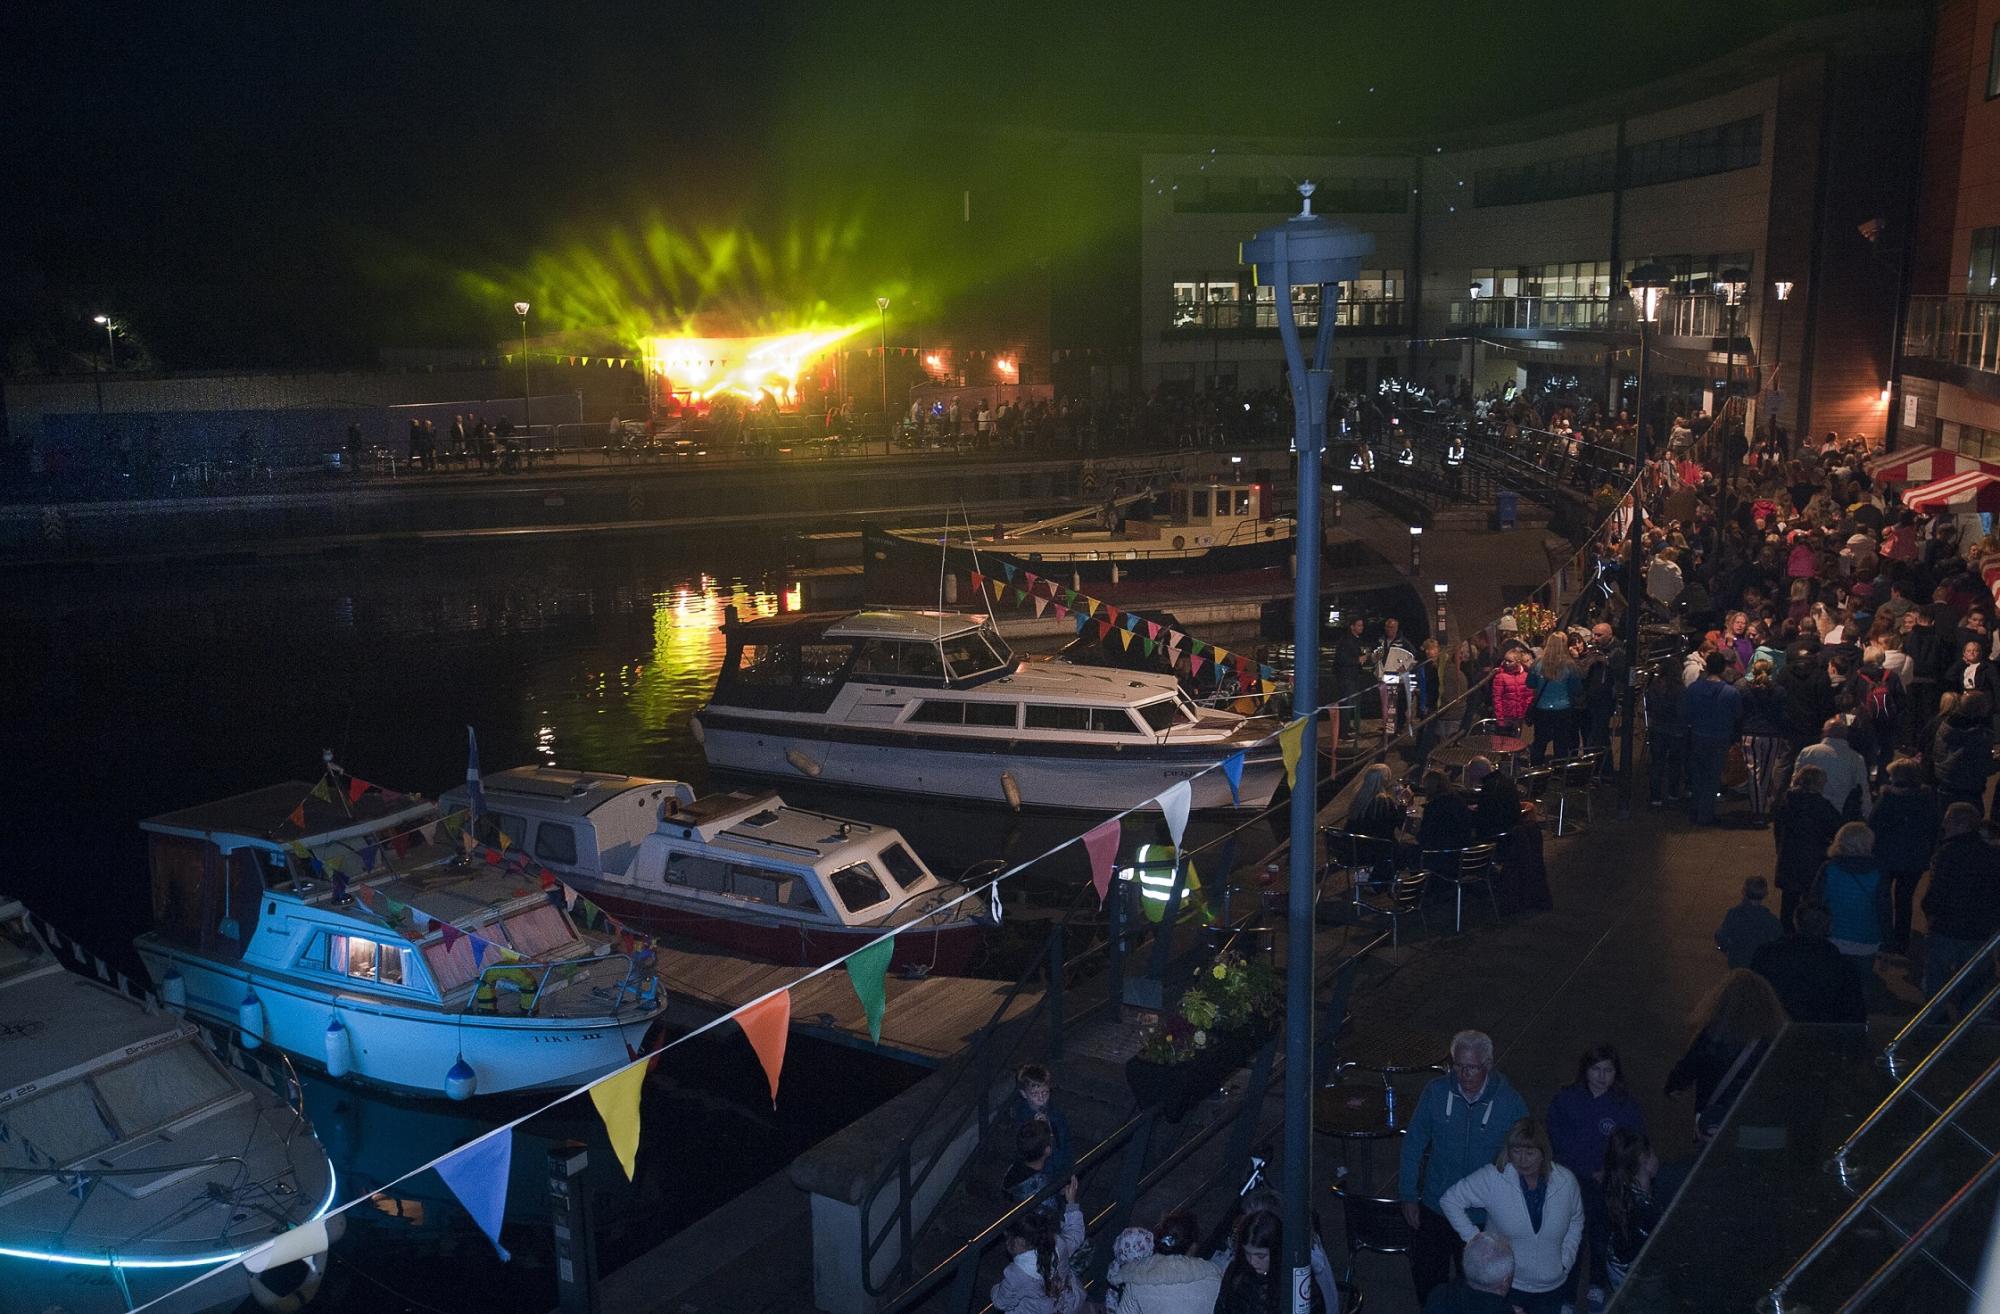 Image from Kirkintilloch Canal Festival - Marina with boats and stage at night